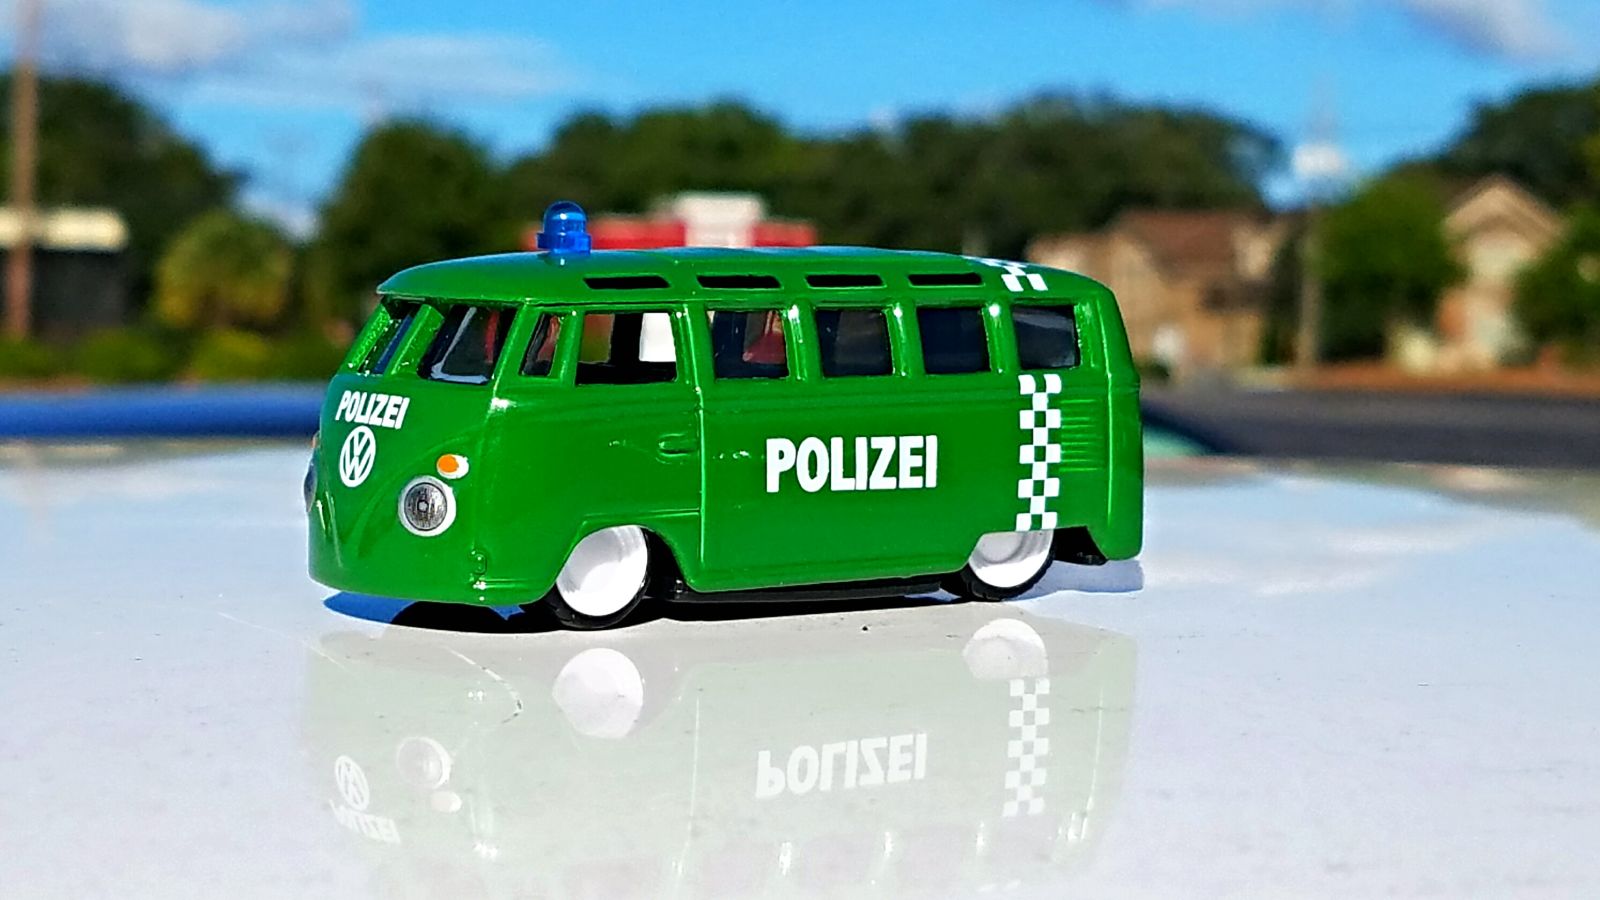 Illustration for article titled Teutonic Tuesday: Ach nein! Es ist die Polizei!em/em